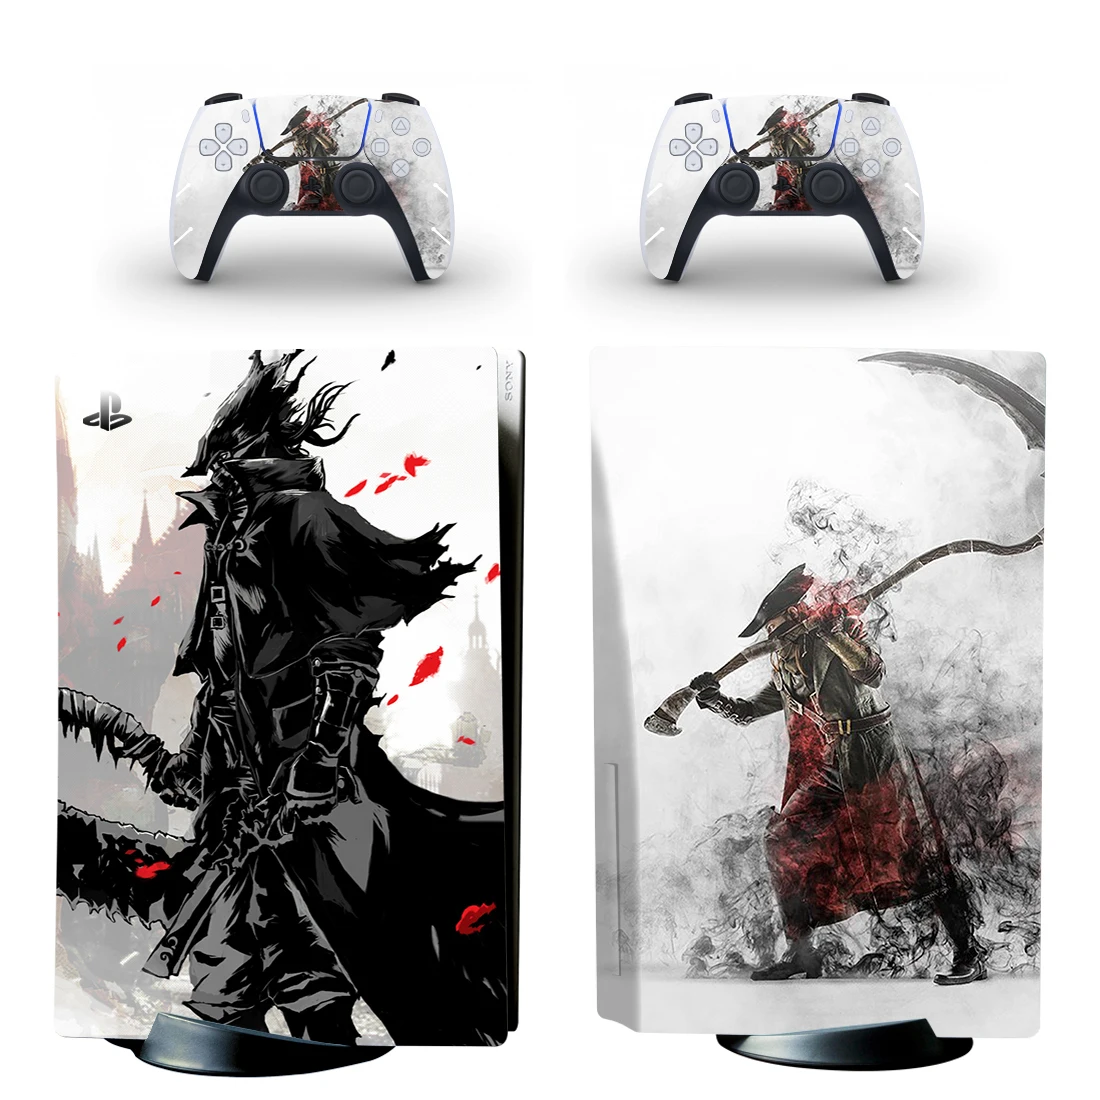 

Bloodborne PS5 Standard Disc Edition Skin Sticker Decal Cover for PlayStation 5 Console & Controller PS5 Skin Sticker Vinyl